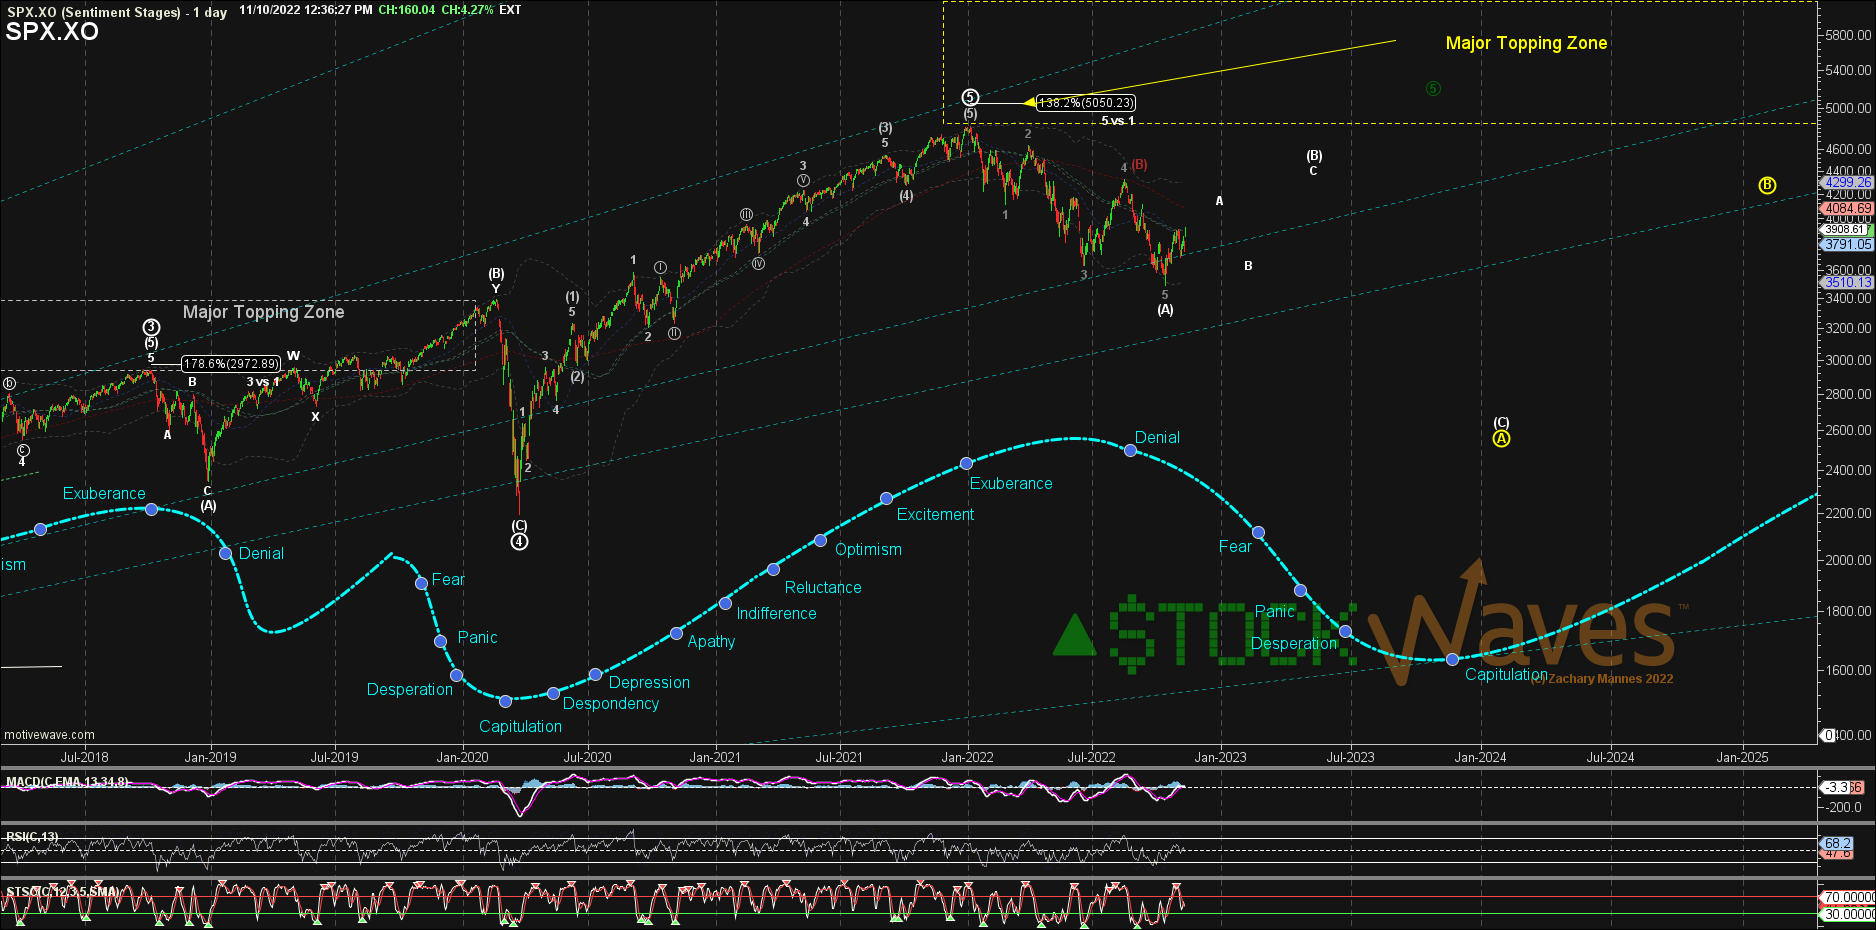 SPX.XO - Sentiment Stages - Nov-10 1236 PM (1 day)